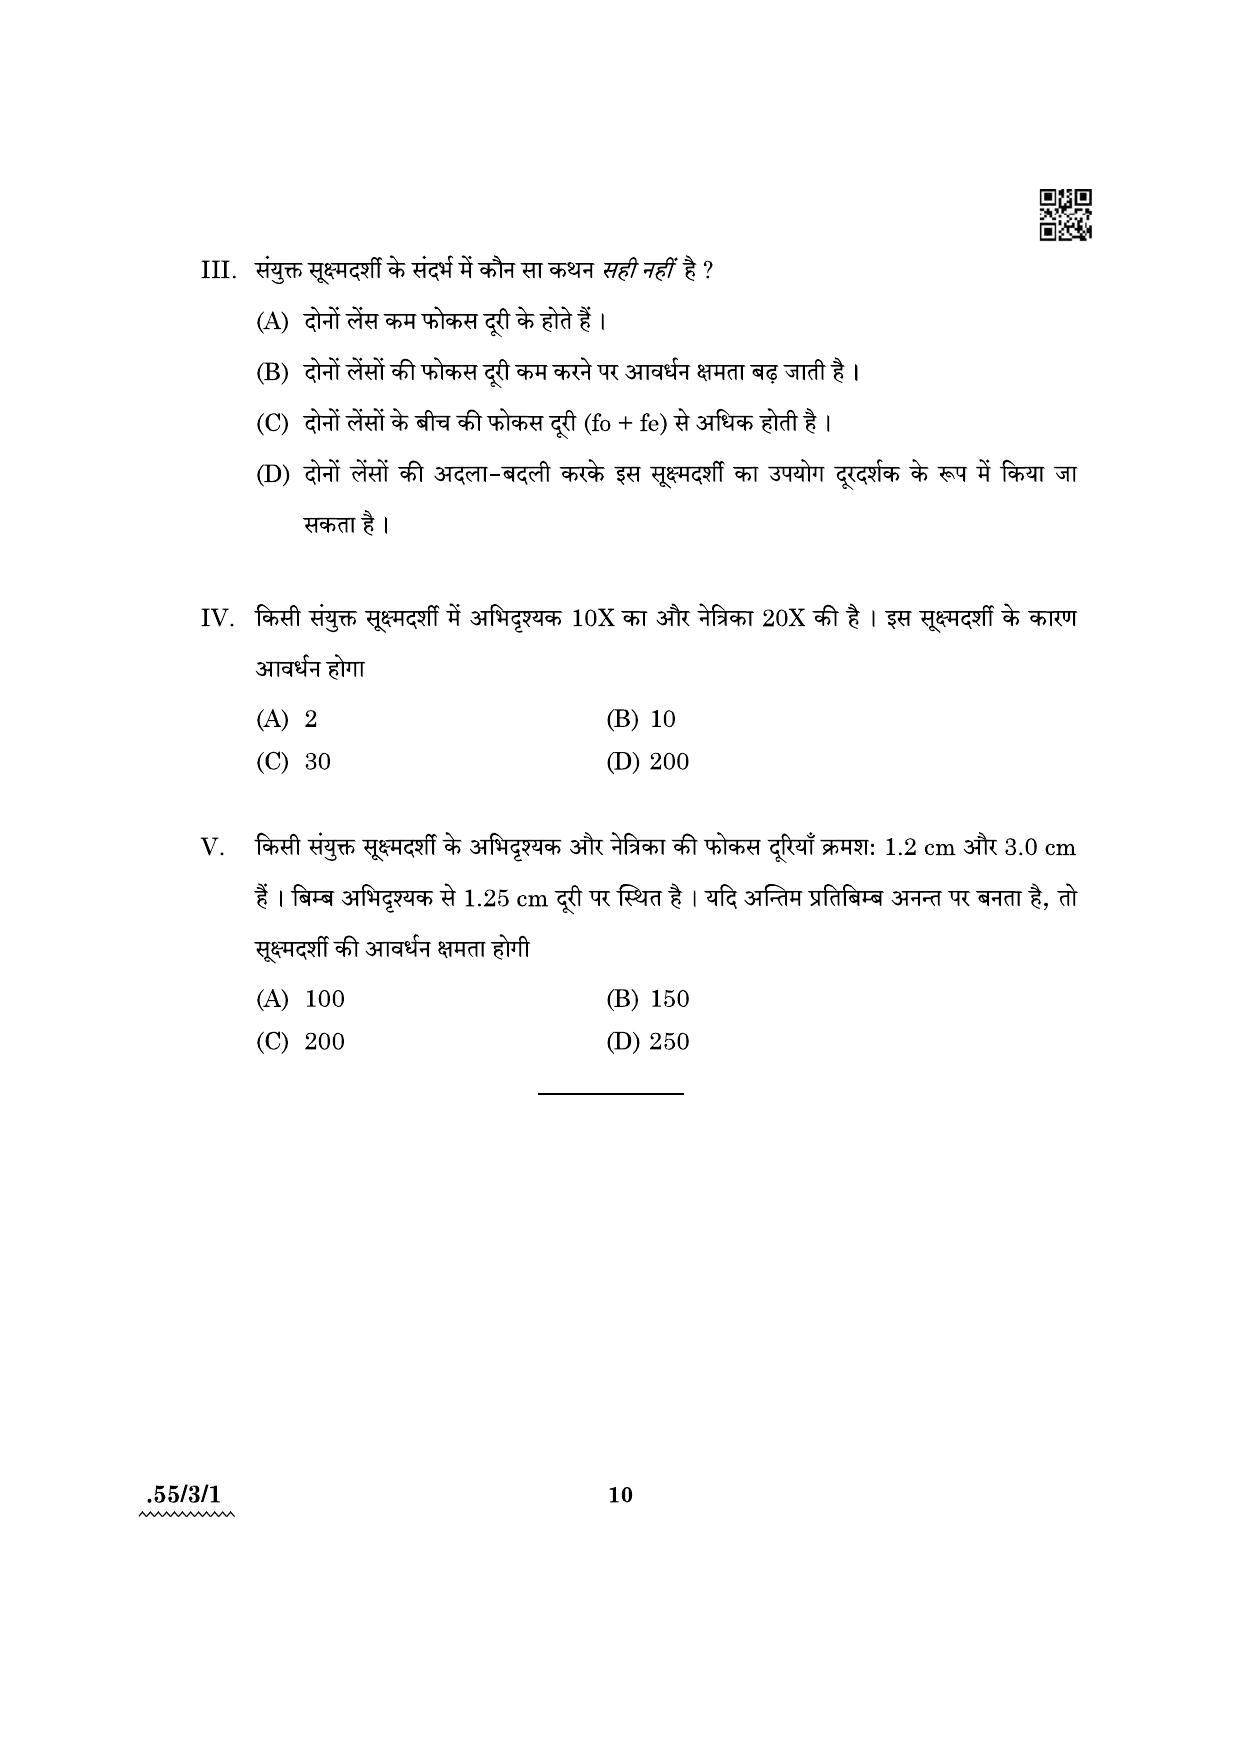 CBSE Class 12 55-3-1 Physics 2022 Question Paper - Page 10